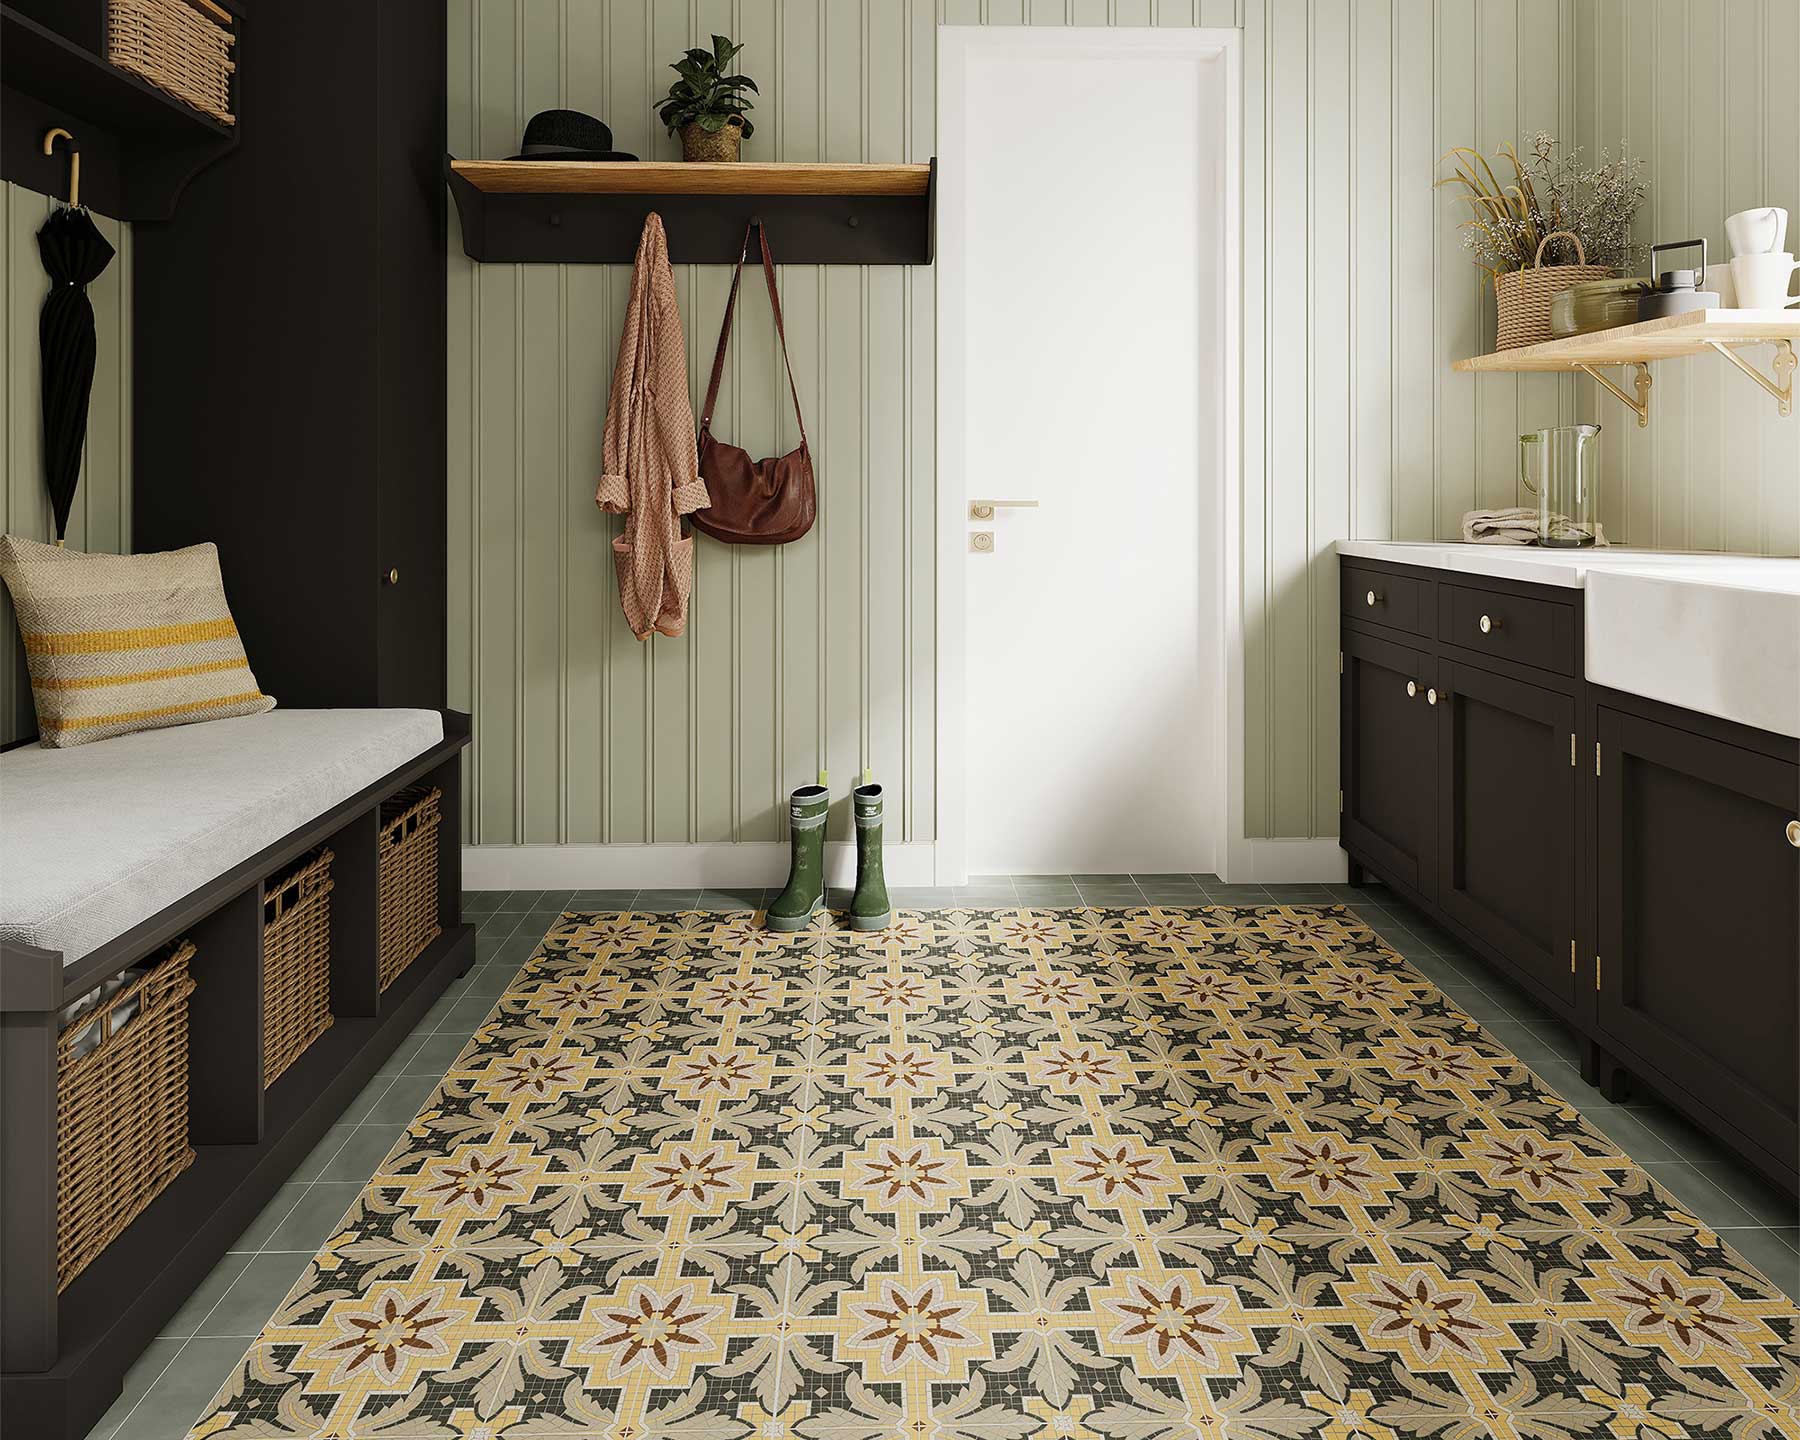 Get creative with mosaic tiles in your boot room